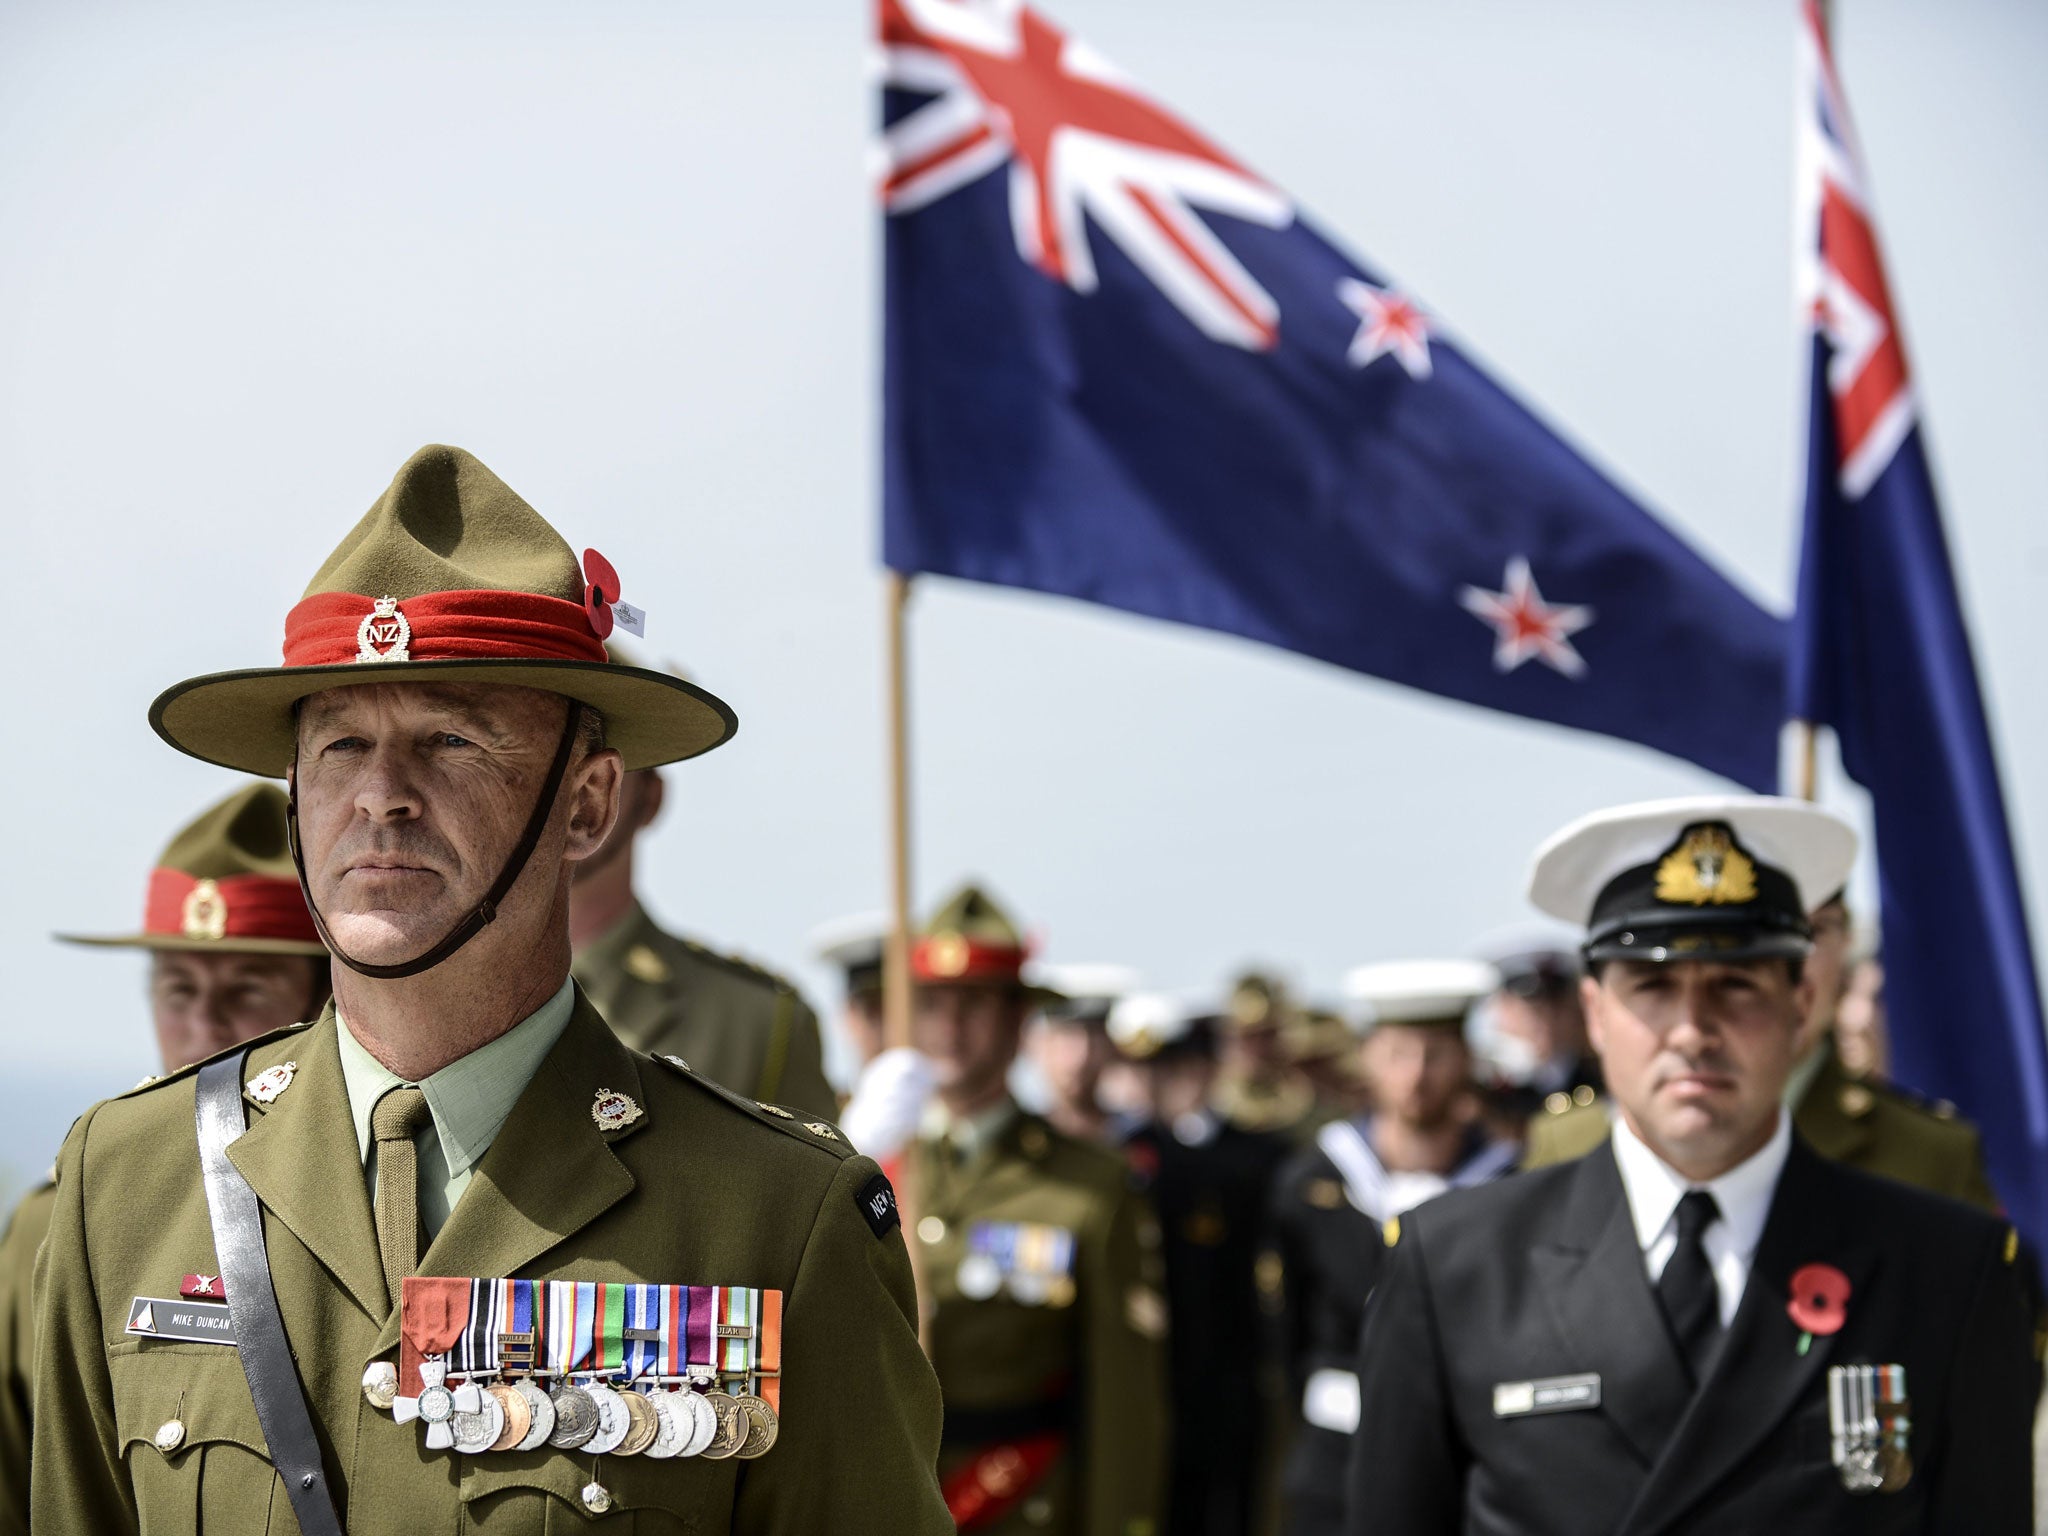 Australian and New Zealand soldiers take stand during the ceremony celebrating the 99th anniversary of the Anzac Day in 2014